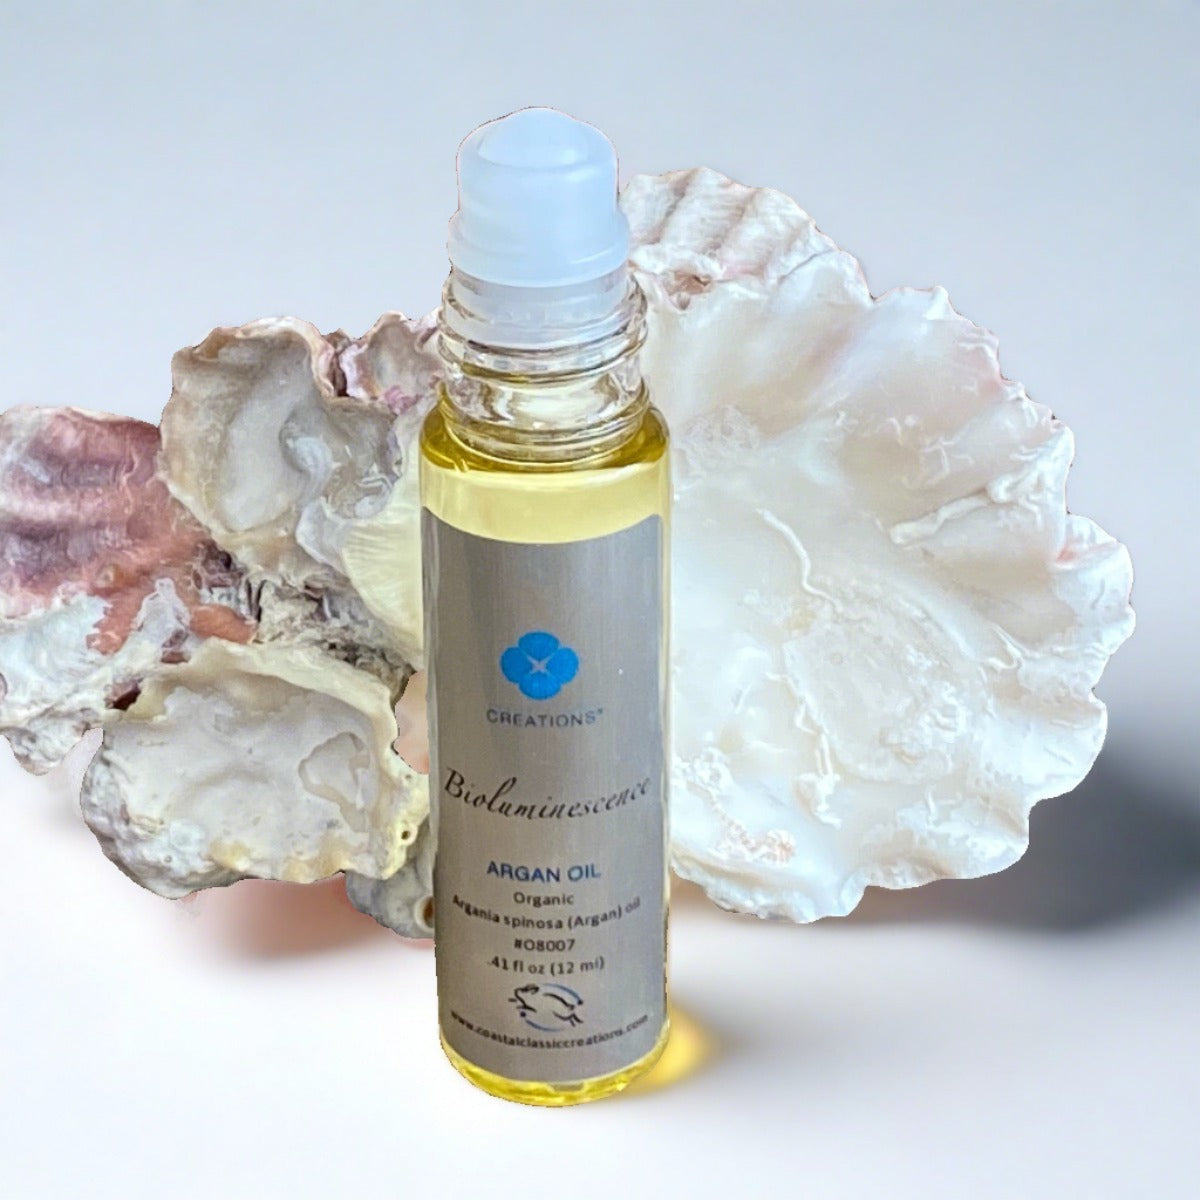 Moisturizing organic argan oil with unique roll-on applicator for travel